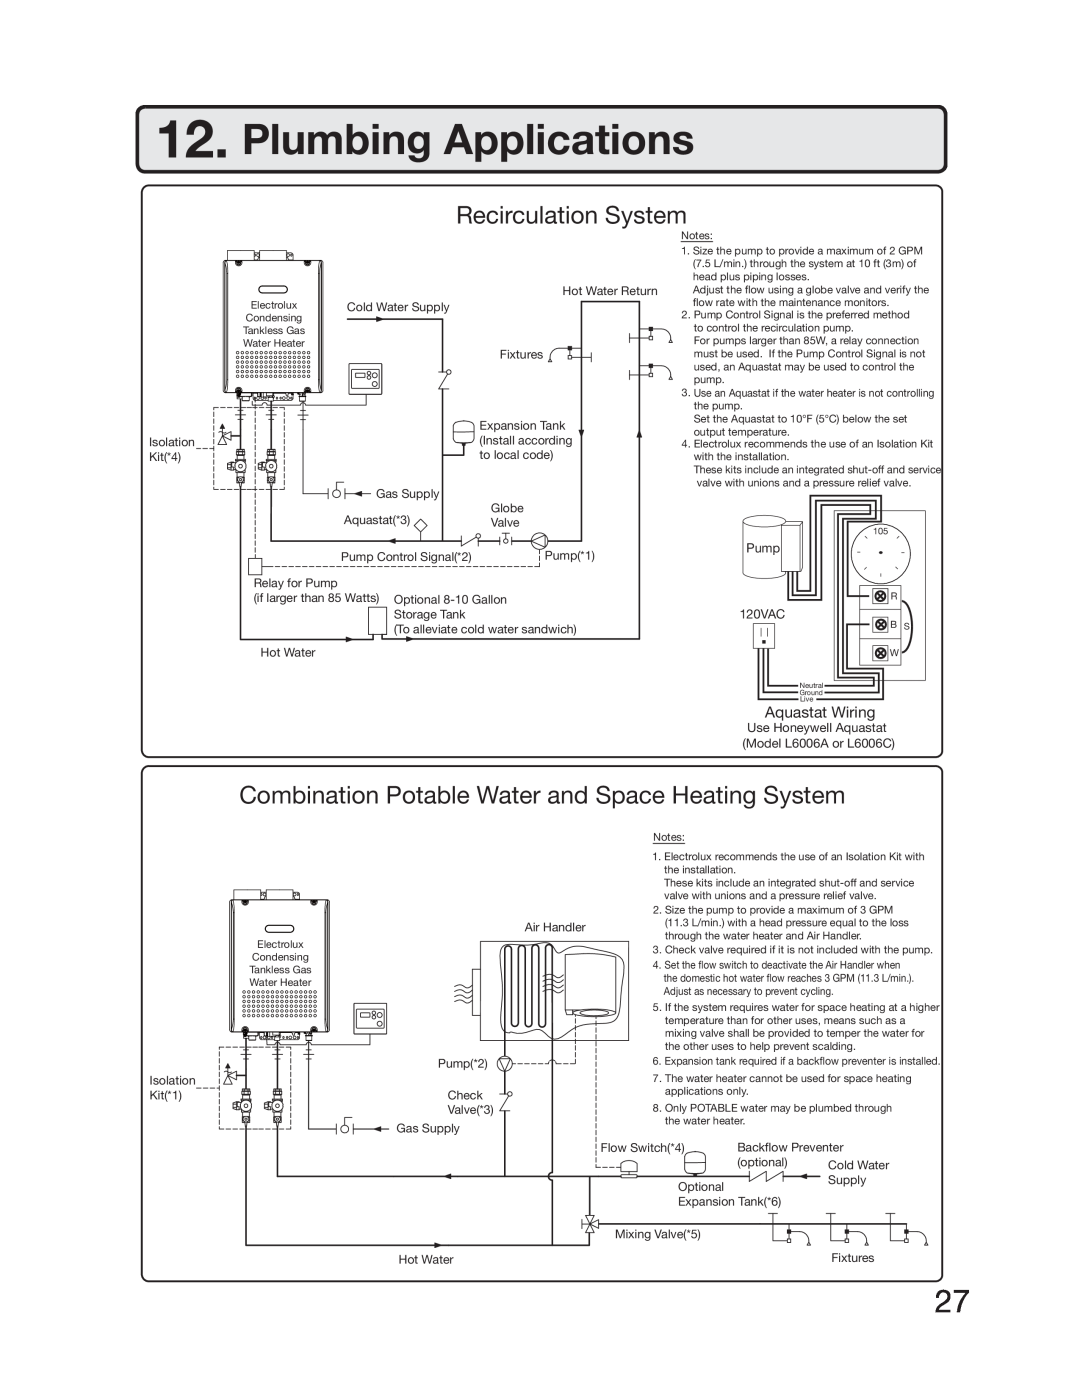 Electrolux 5995615357 Plumbing Applications, Recirculation System, Combination Potable Water and Space Heating System 